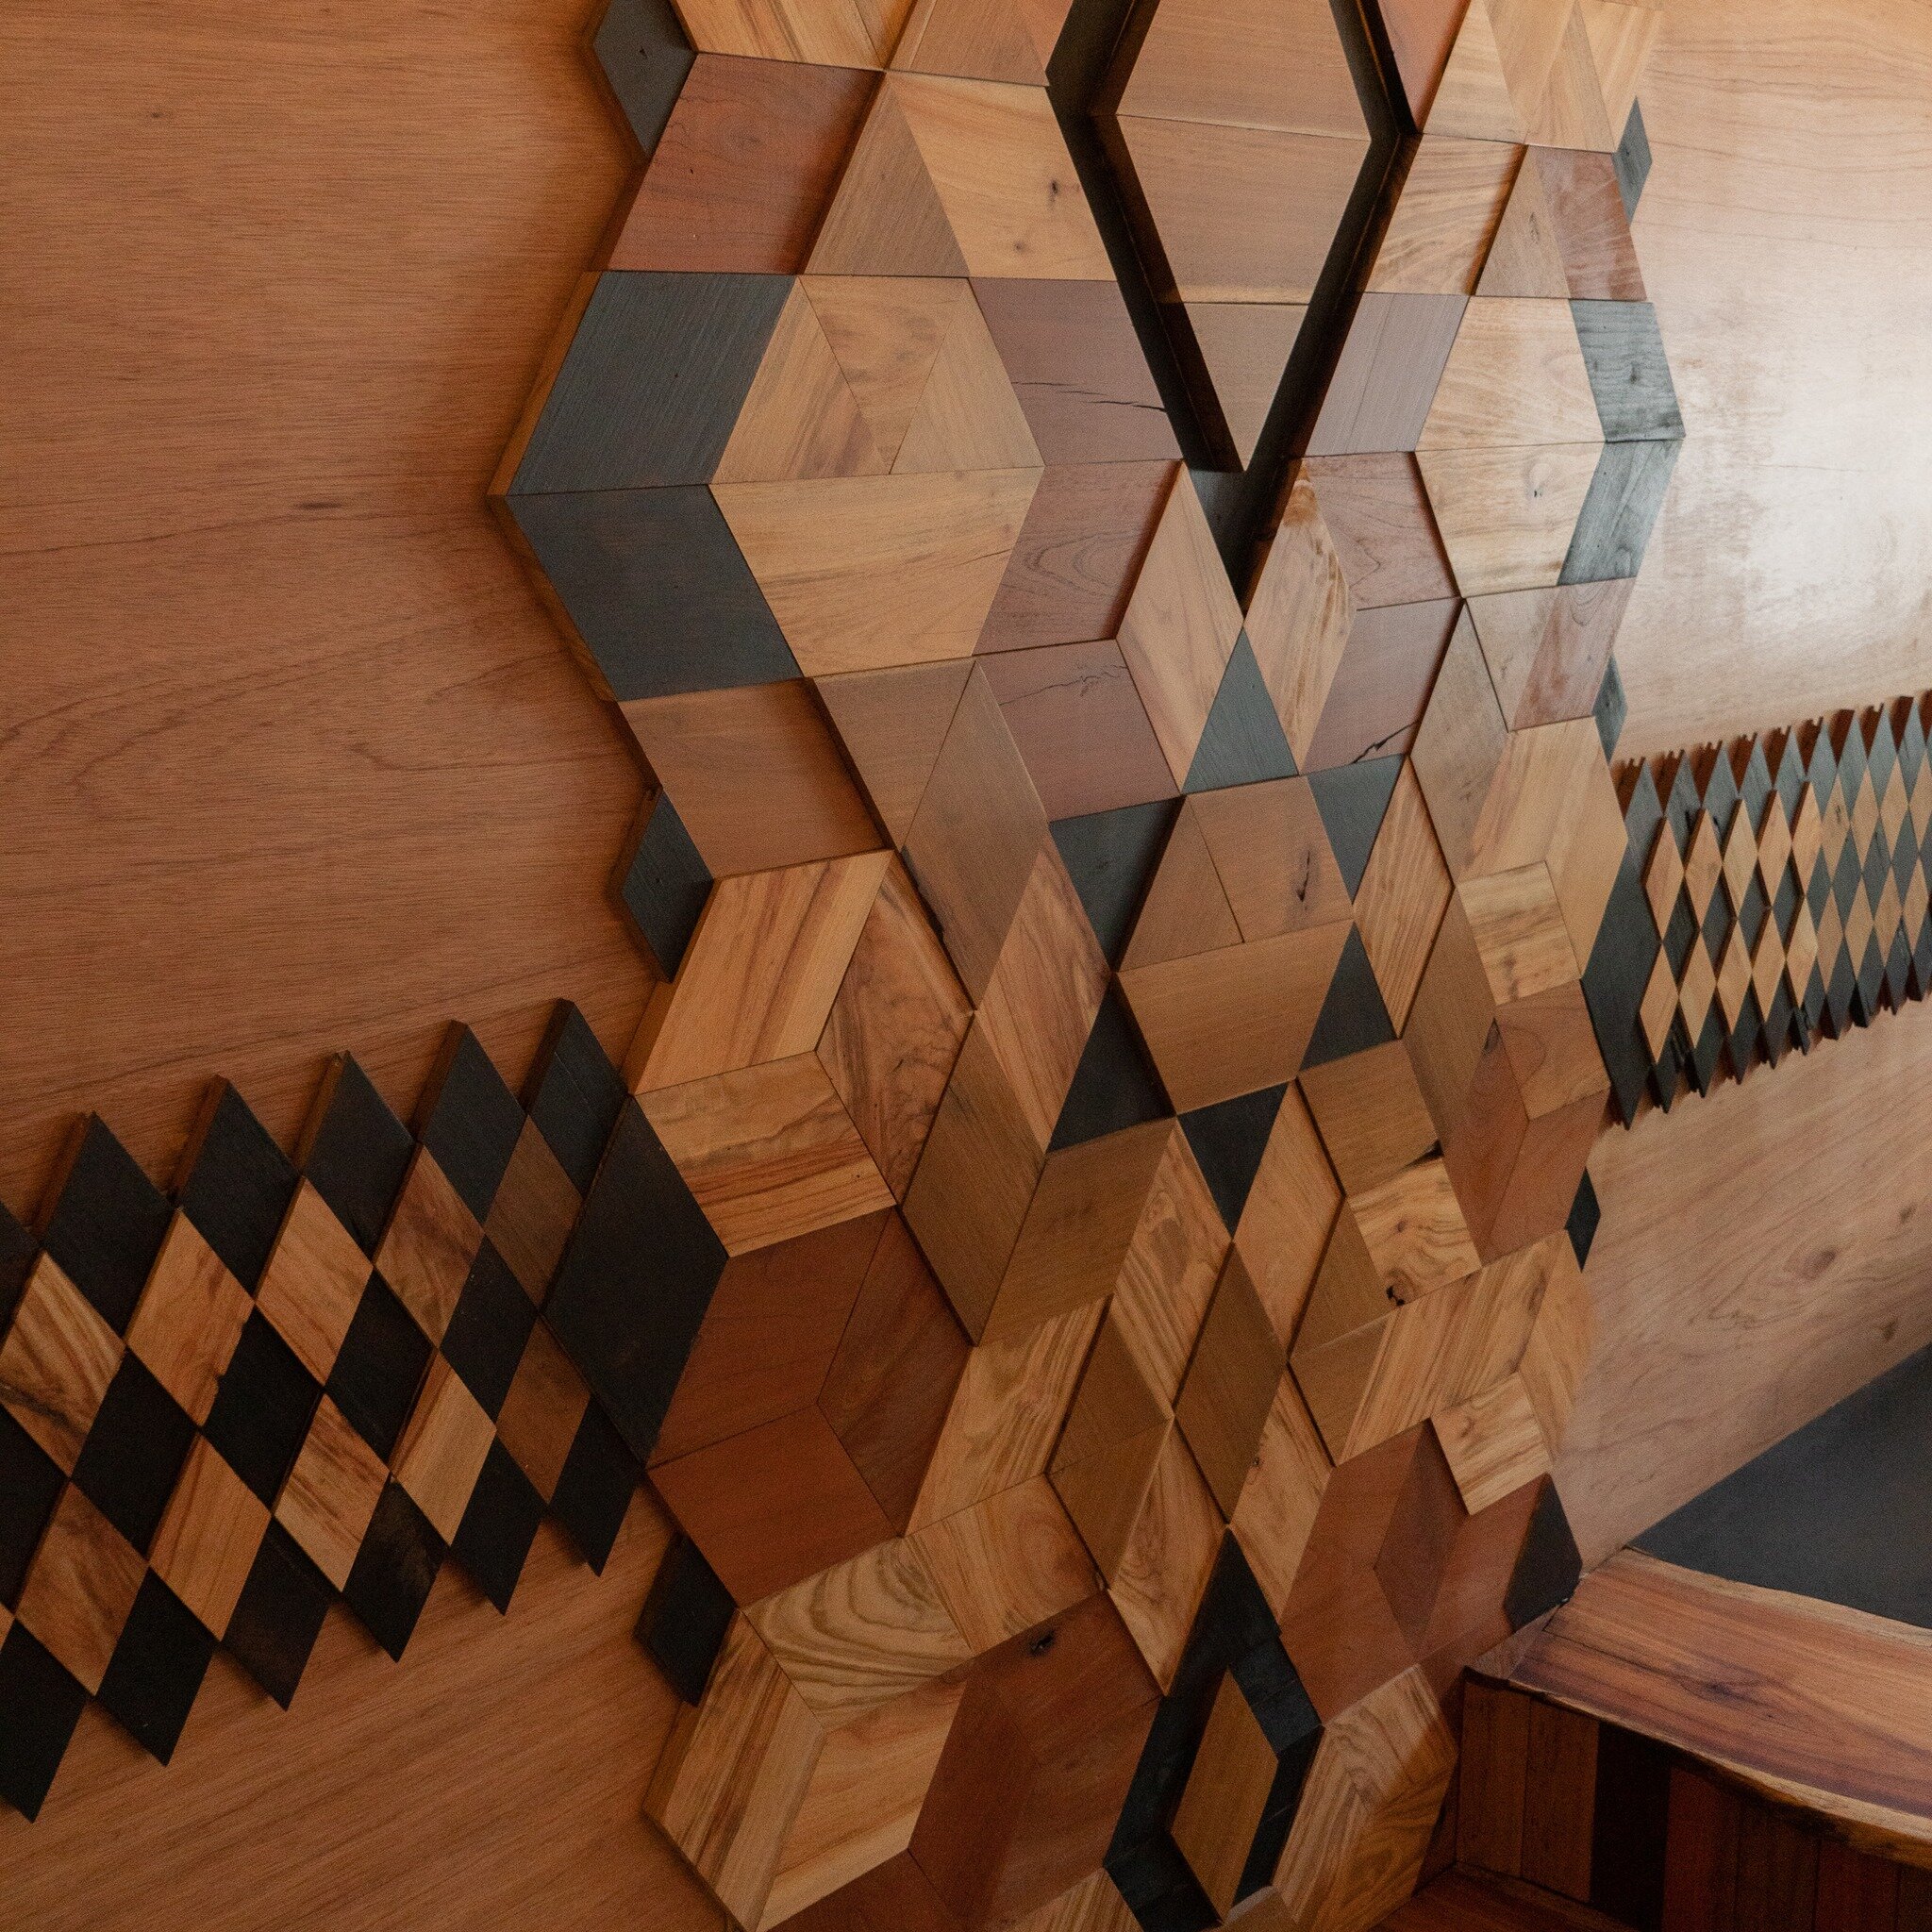 Sacred Geometry timber tiling.
We use timber off-cuts to create stunning feature walls.
Take your house to temple level!

#sacredgeometry #temple #interiordecor #interiordesign #meditiation #yoga #recycled #timber #byronbay #furniture 

Link in Bio